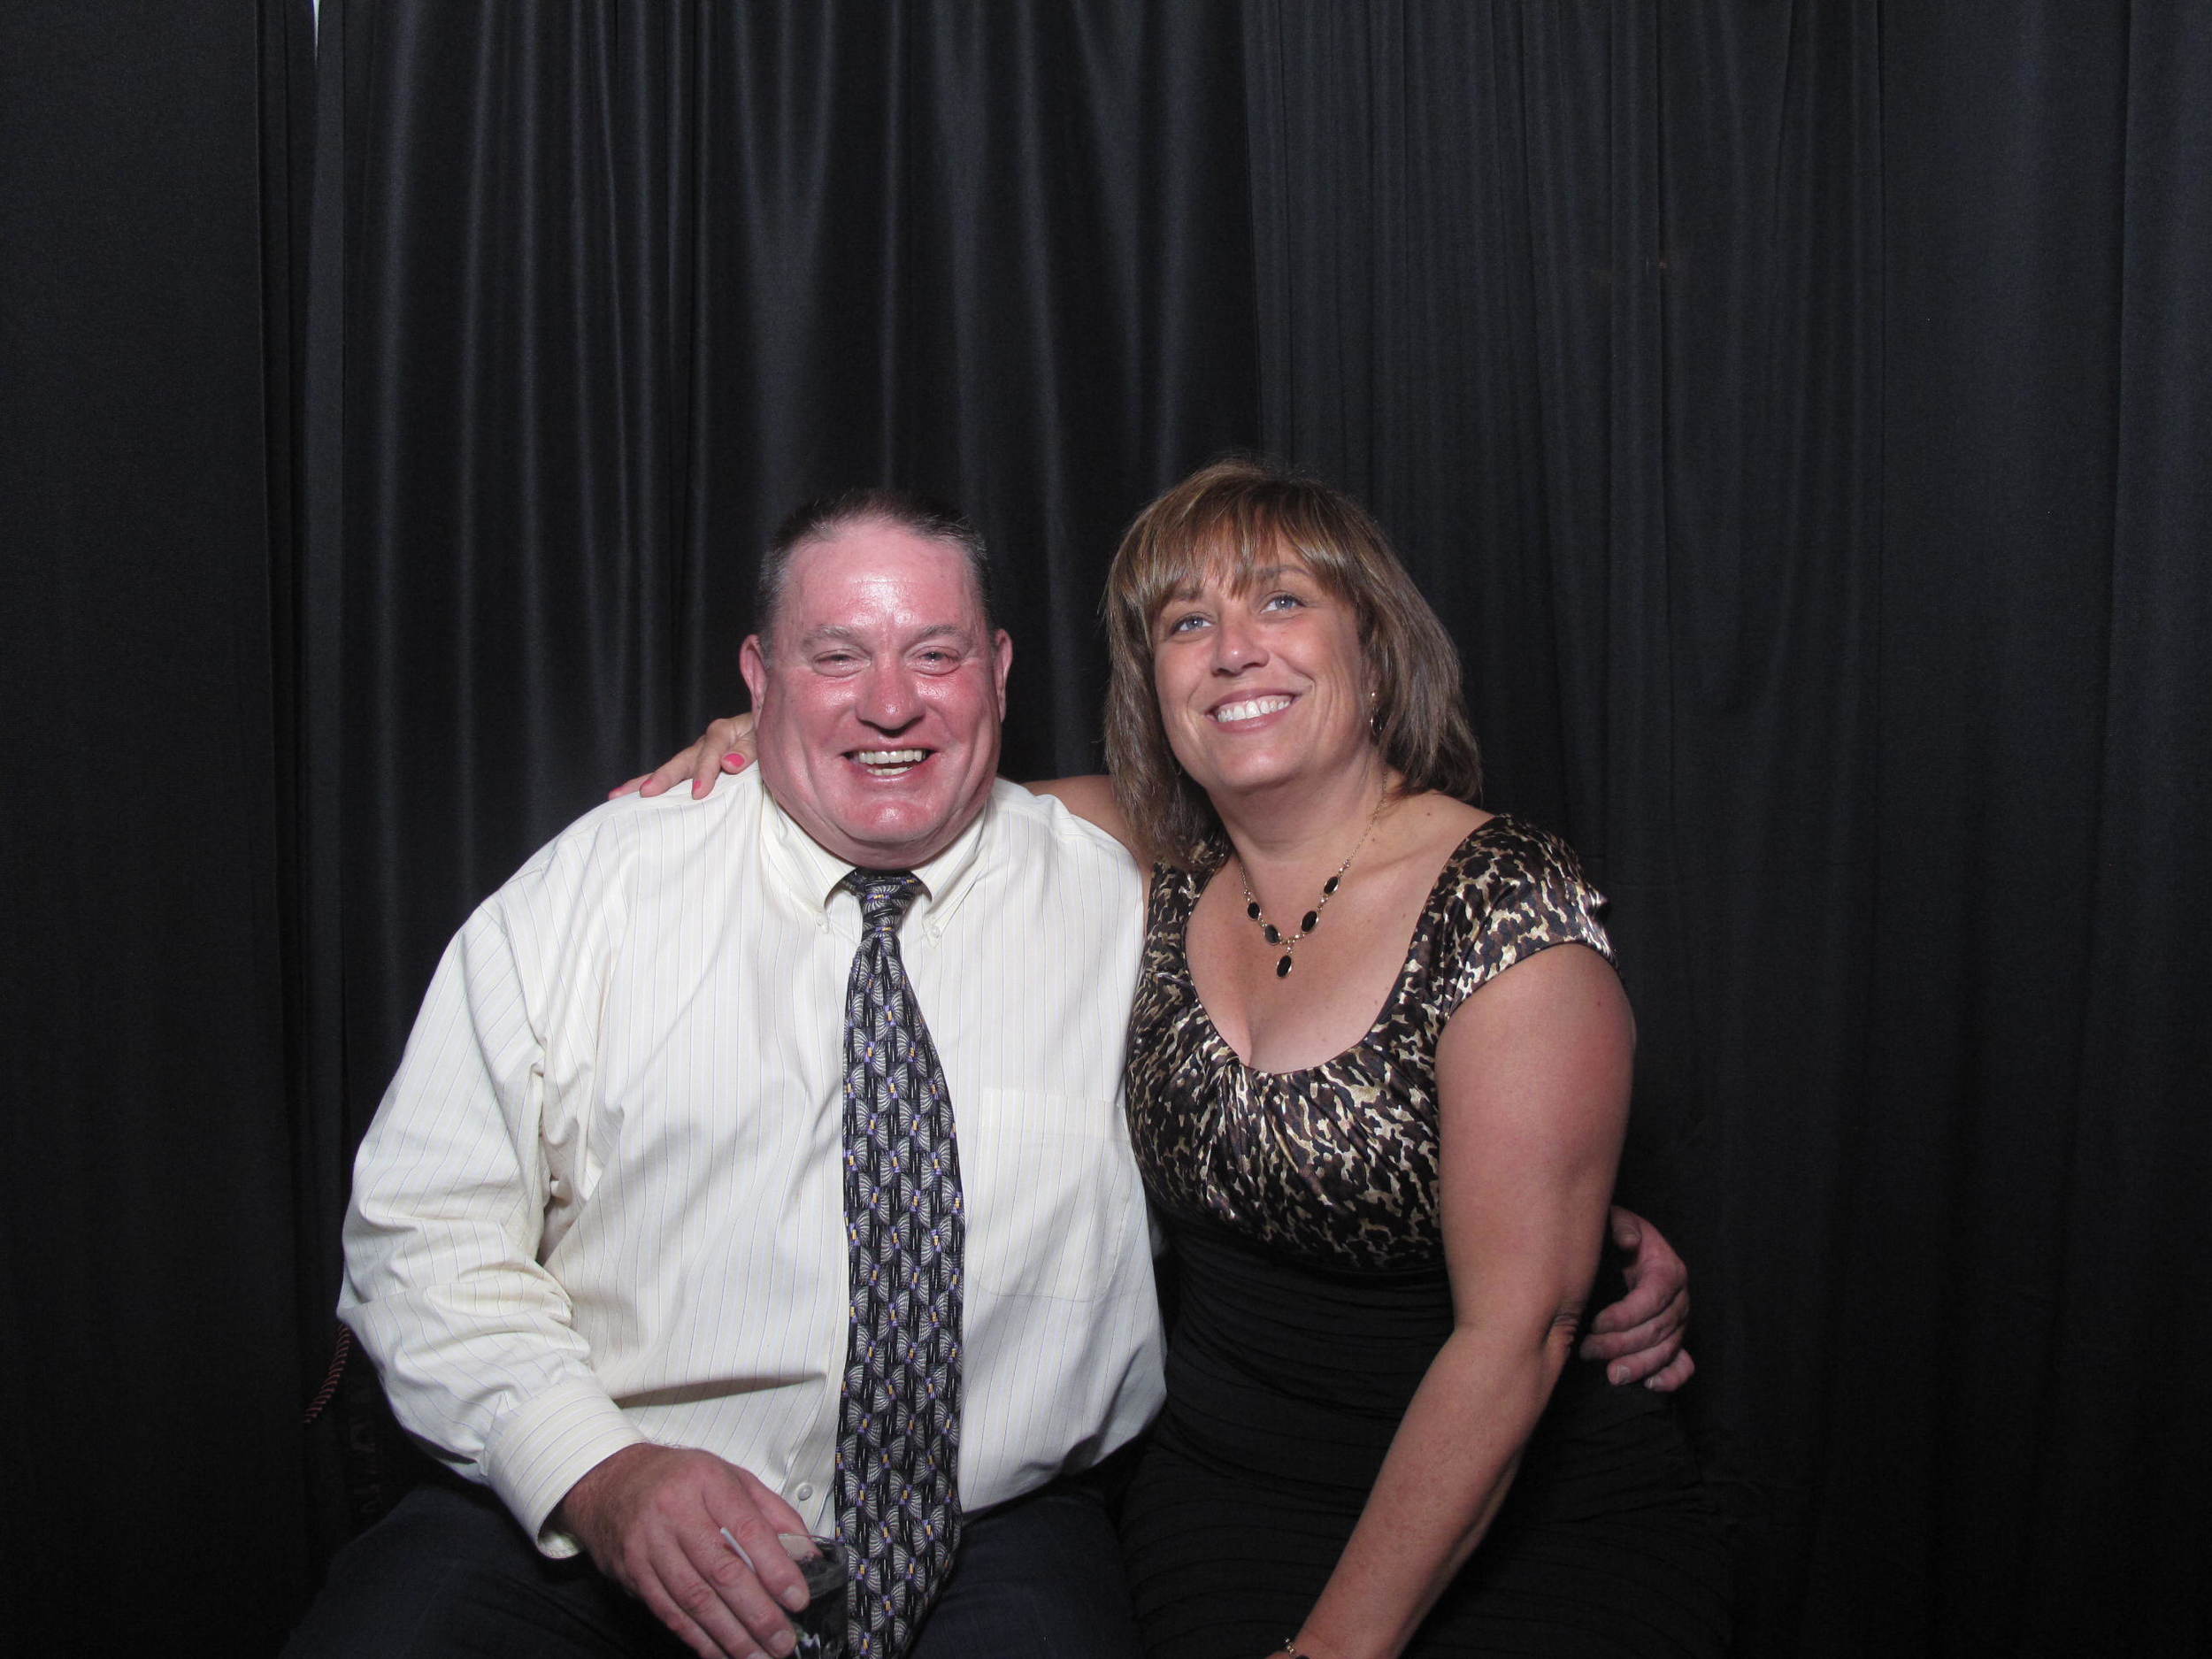 Snapshot Photobooths at The Crystal Point Yacht Club